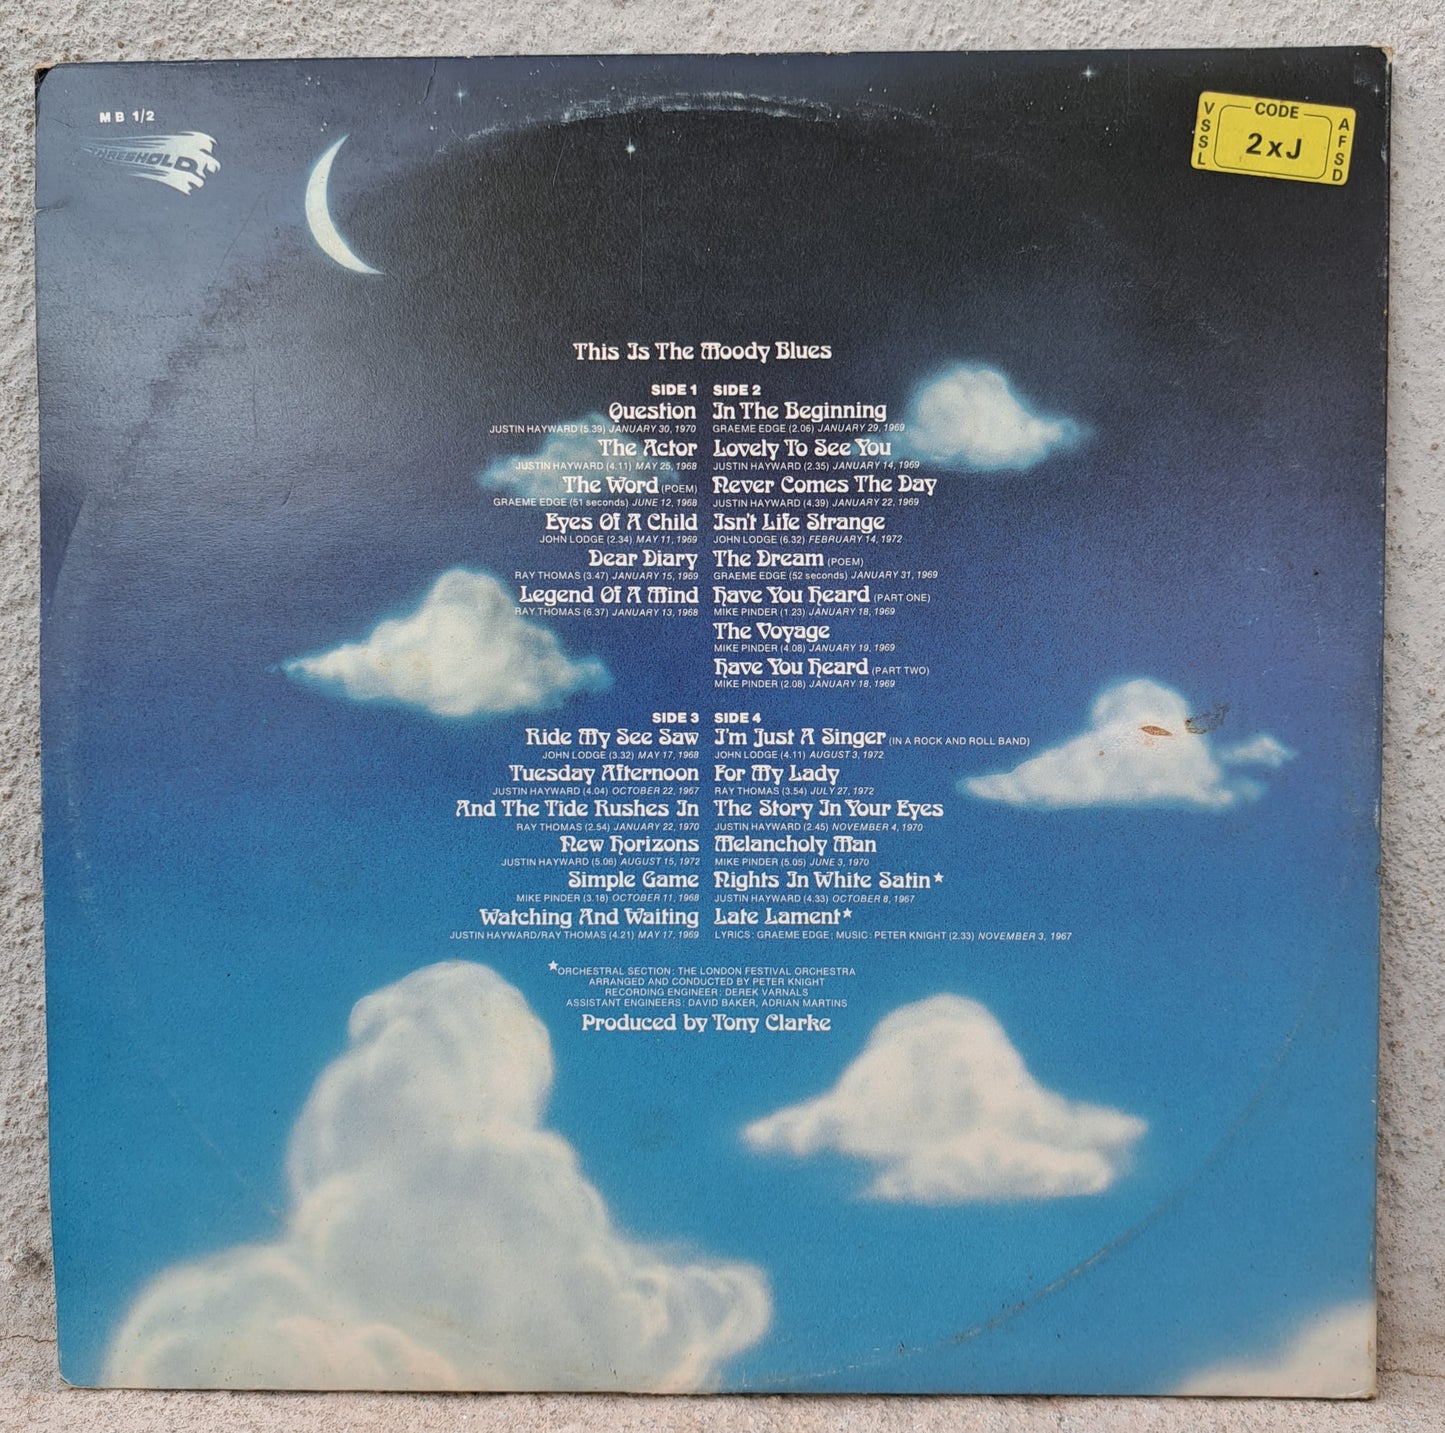 The Moody Blues - This is the Moody Blues (double album)